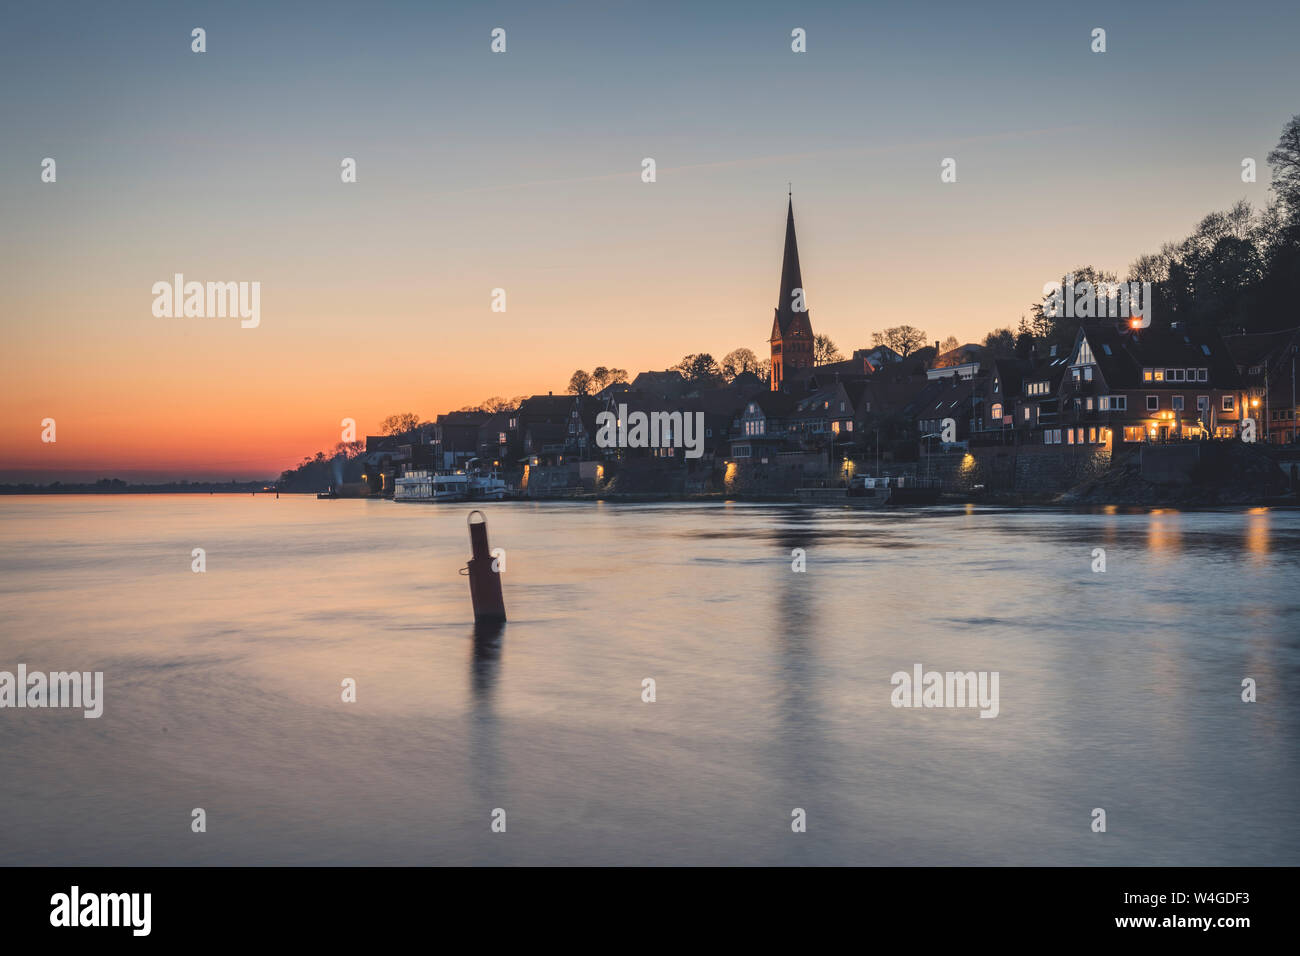 Townscape with River Elbe at sunset, Lauenburg, Schleswig-Holstein, Germany Stock Photo